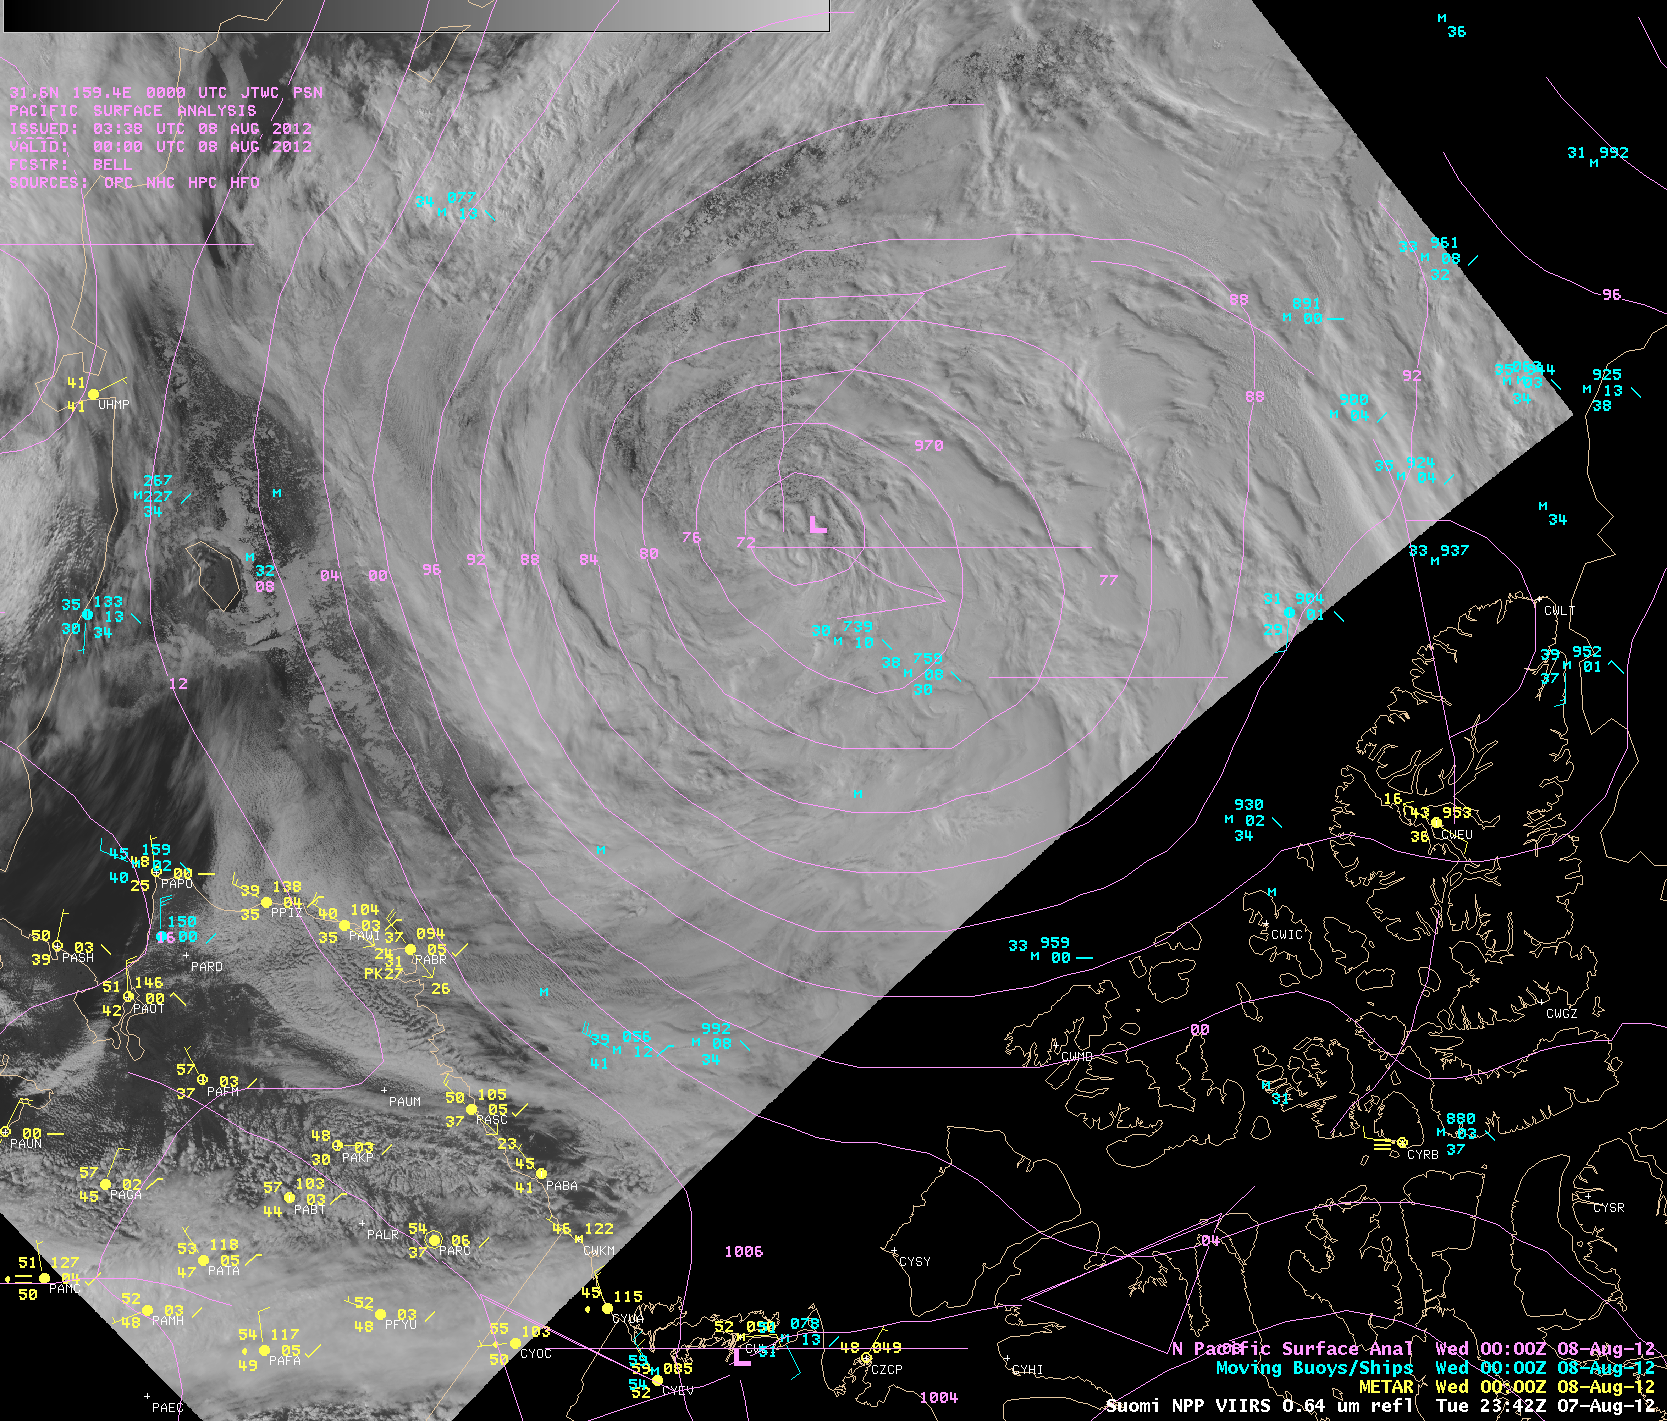 Suomi NPP VIIRS 0.64 Âµm visible channel + 11.45 Âµm IR channel images